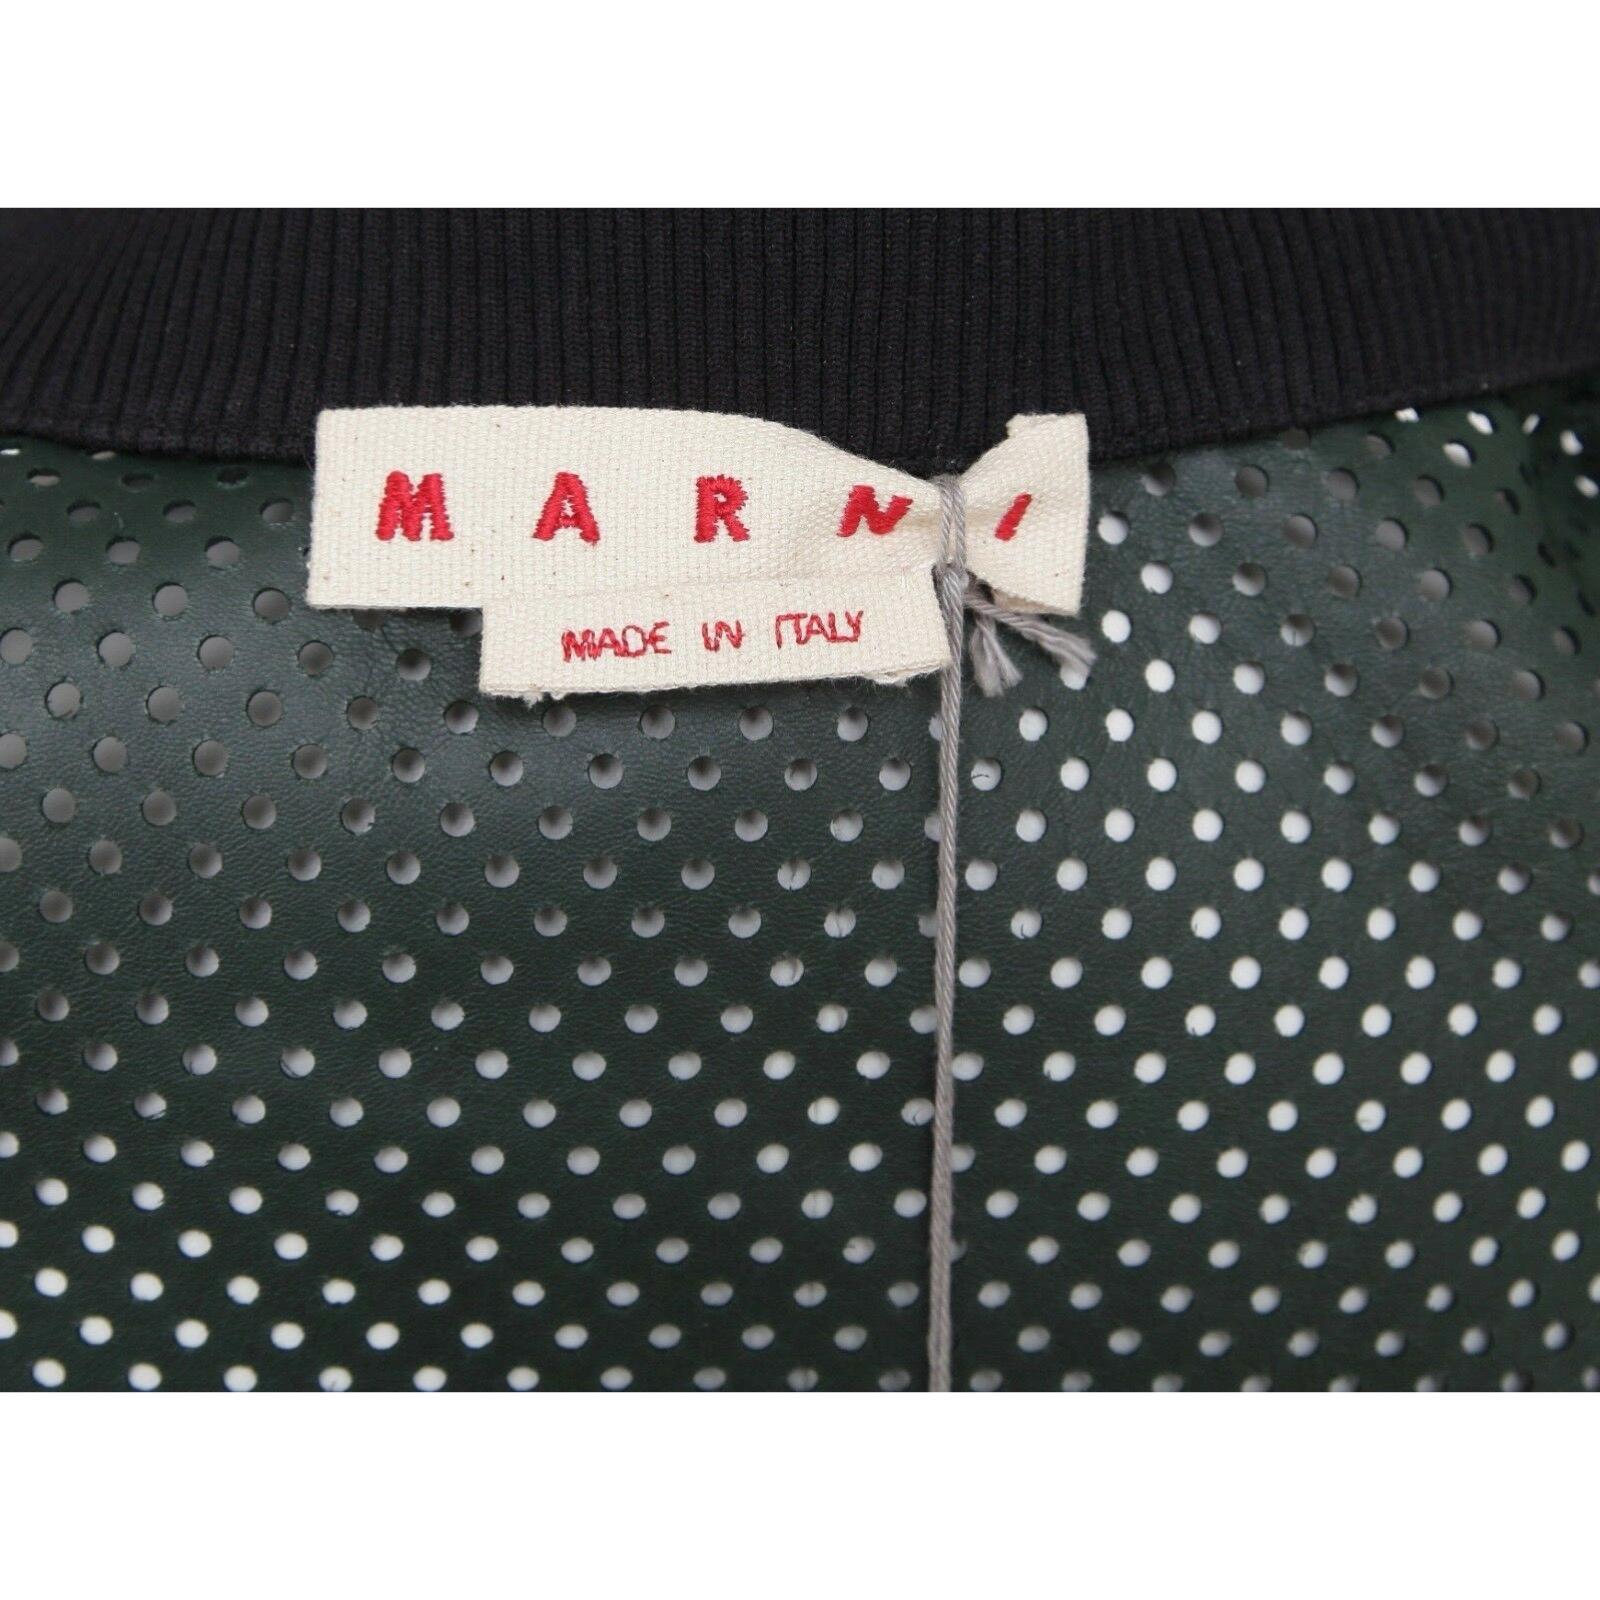 MARNI Green Patent Leather Jacket Perforated Emerald Bomber Coat Floral Sz 38 BN For Sale 2